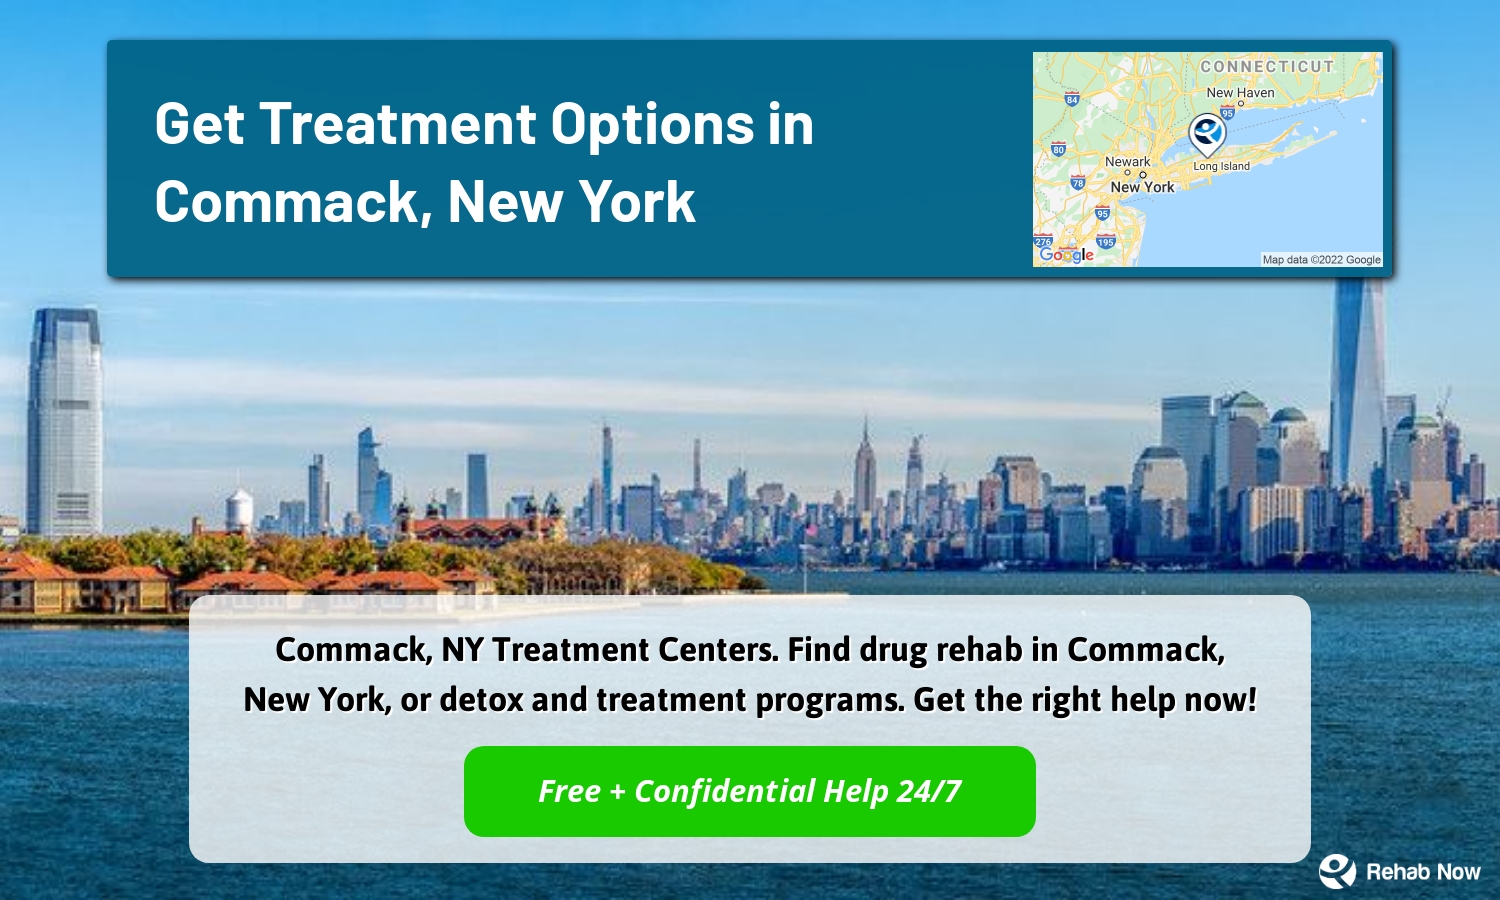 Commack, NY Treatment Centers. Find drug rehab in Commack, New York, or detox and treatment programs. Get the right help now!